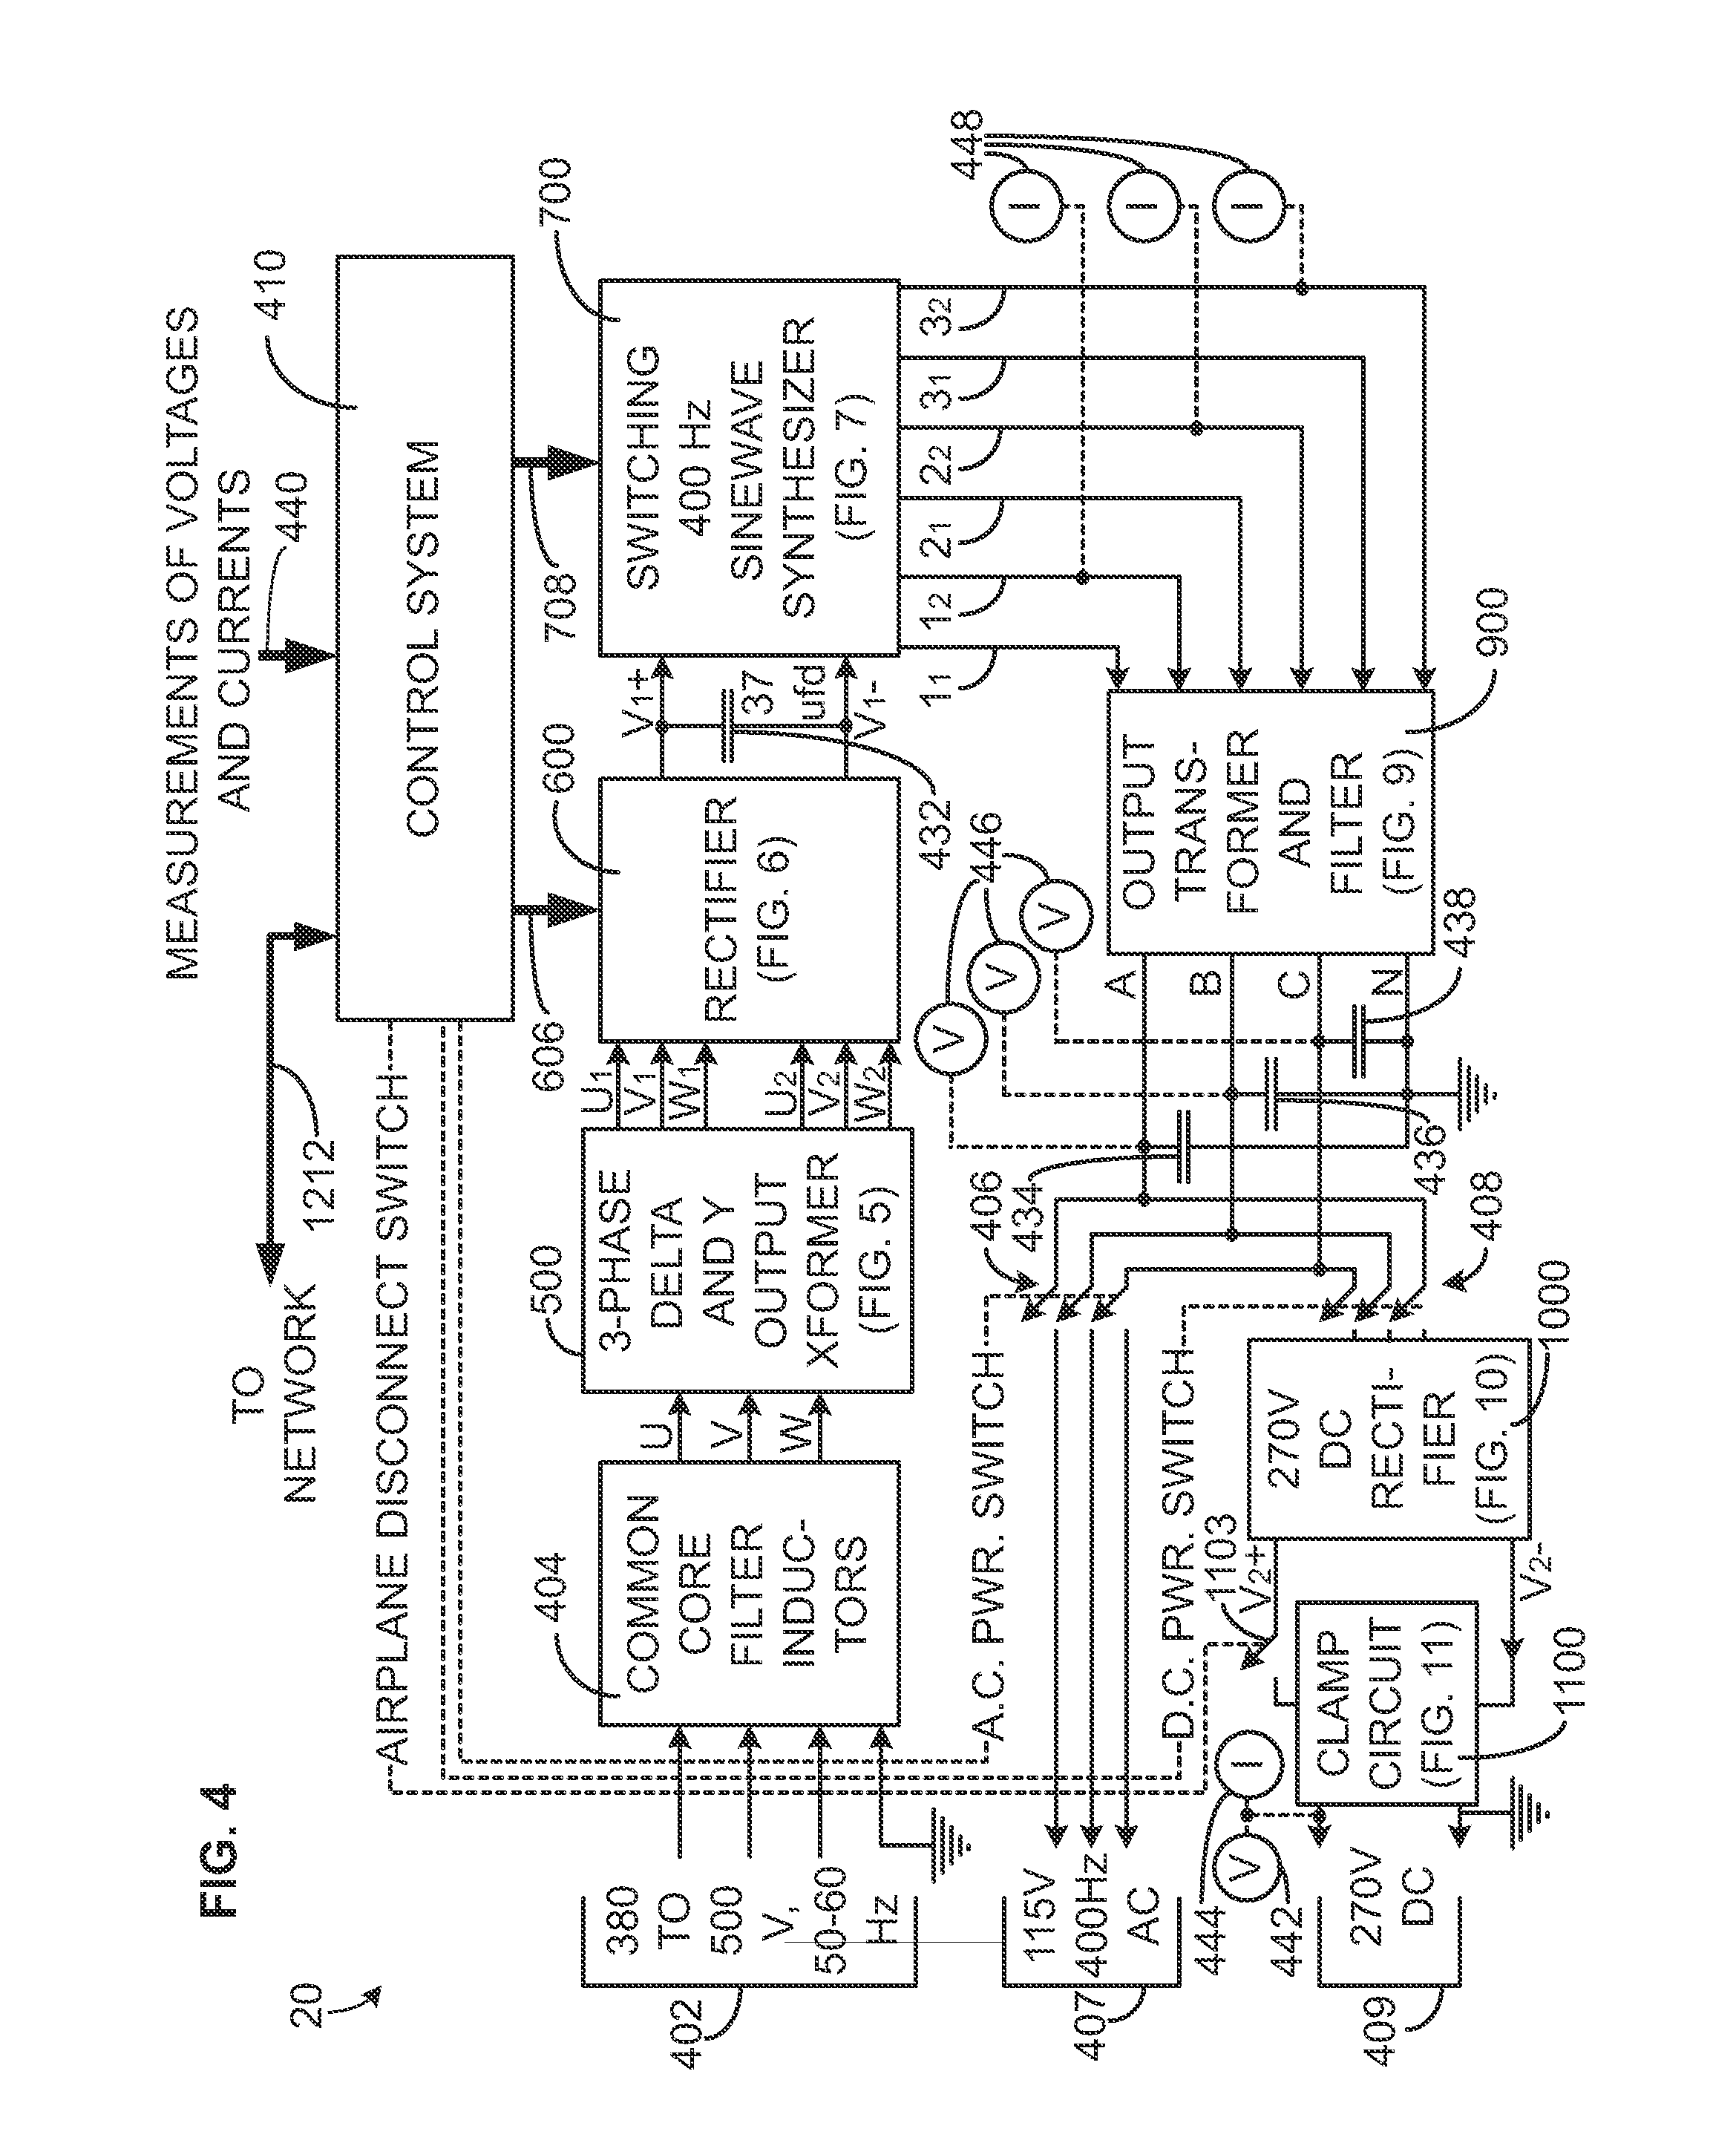 Multi-voltage power supply for a universal airplane ground support equipment cart